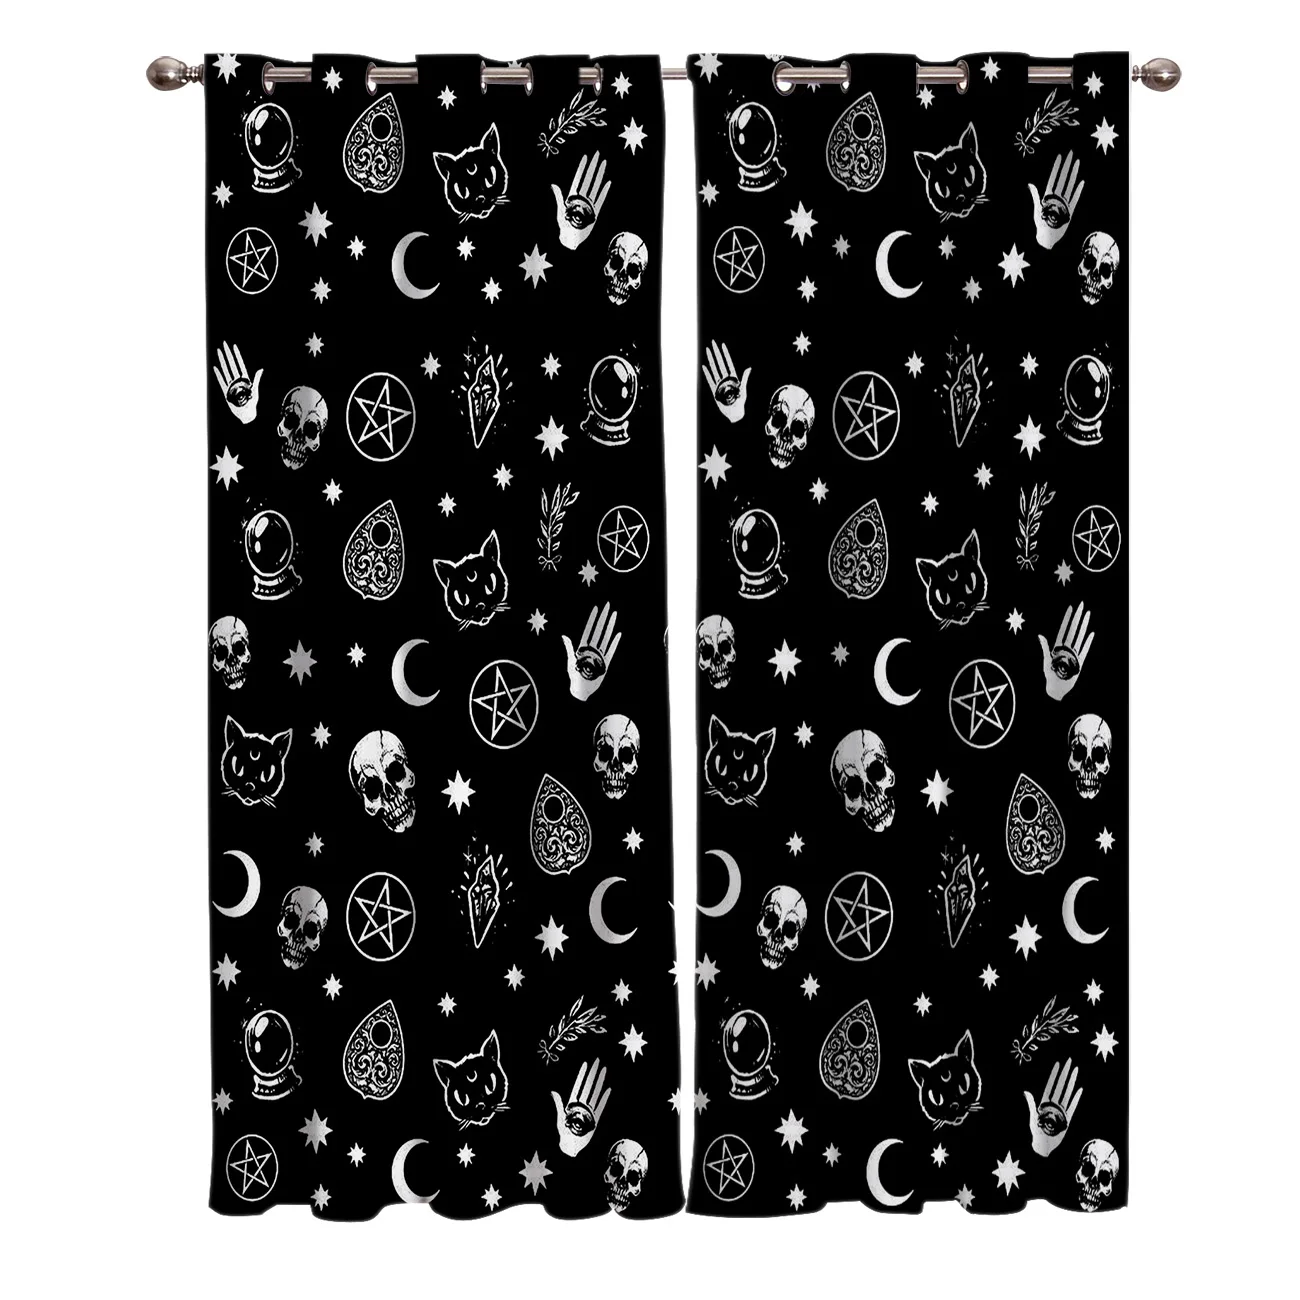 Halloween Black Witch Skull Moon Divination Window Treatments Curtains Valance Living Room Kitchen Indoor Swag Kids Curtain